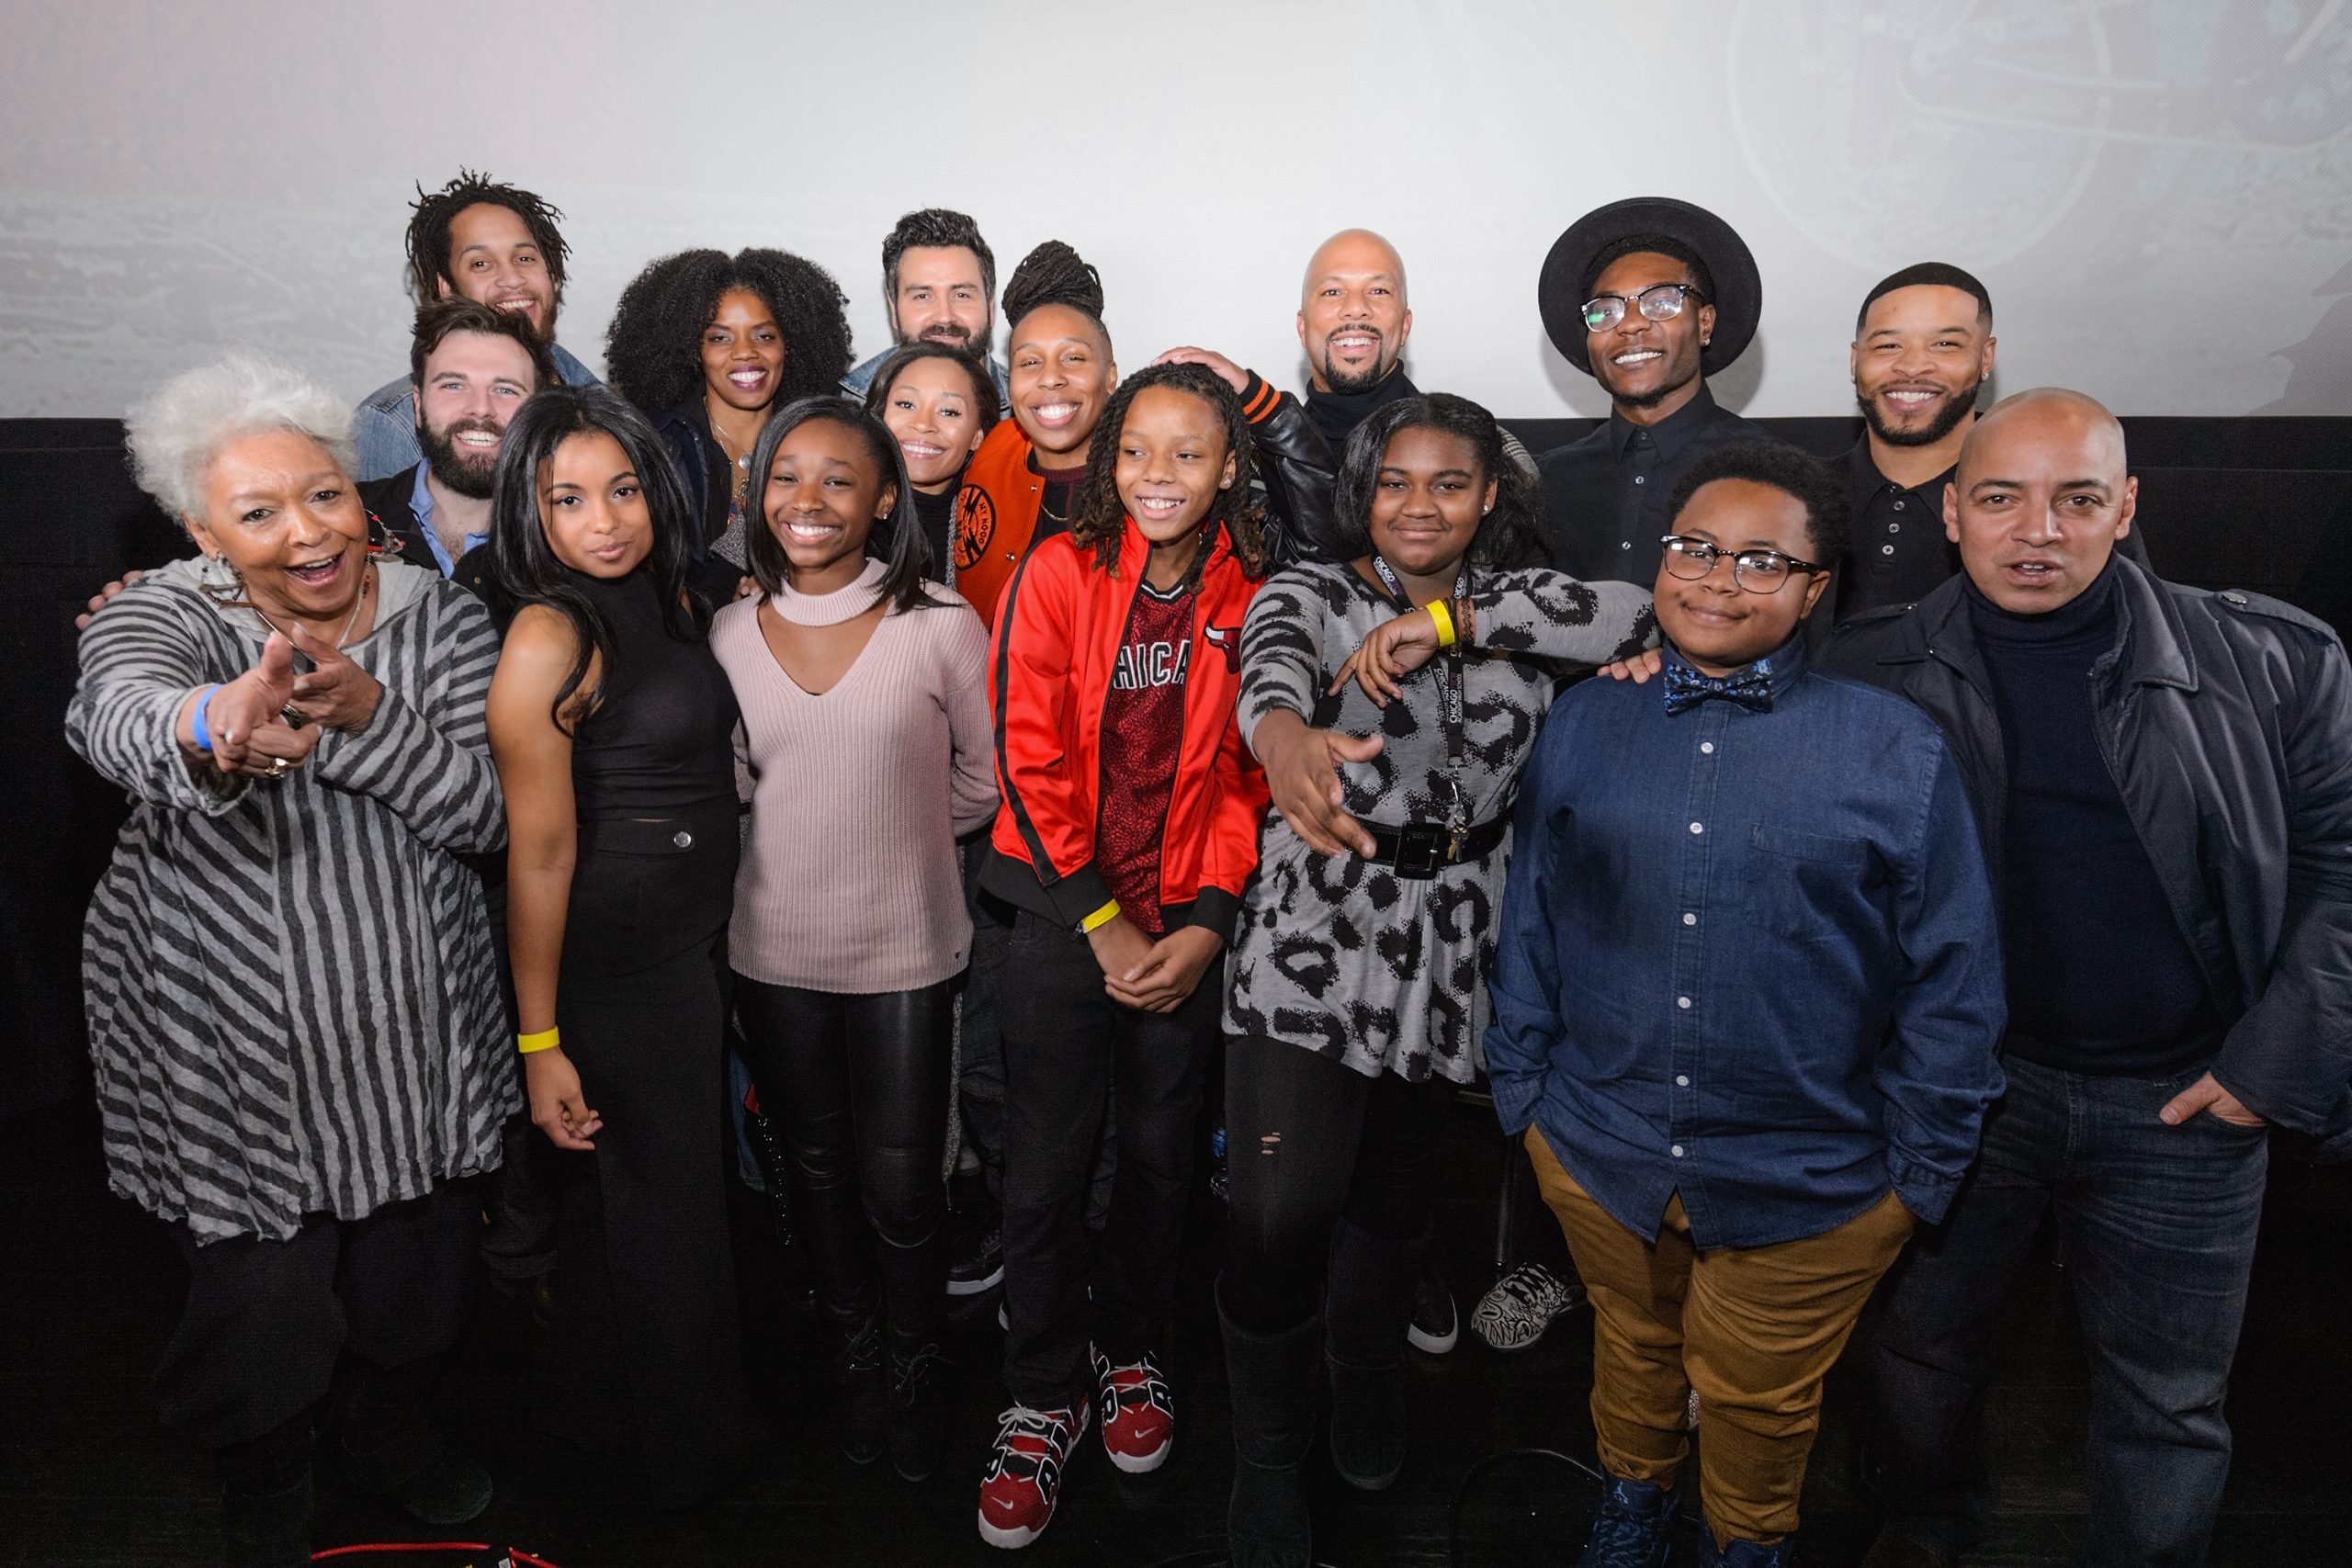 Cast members attends the Q&A during an advance screening of Showtime's 'The Chi' on Chicago's South Side